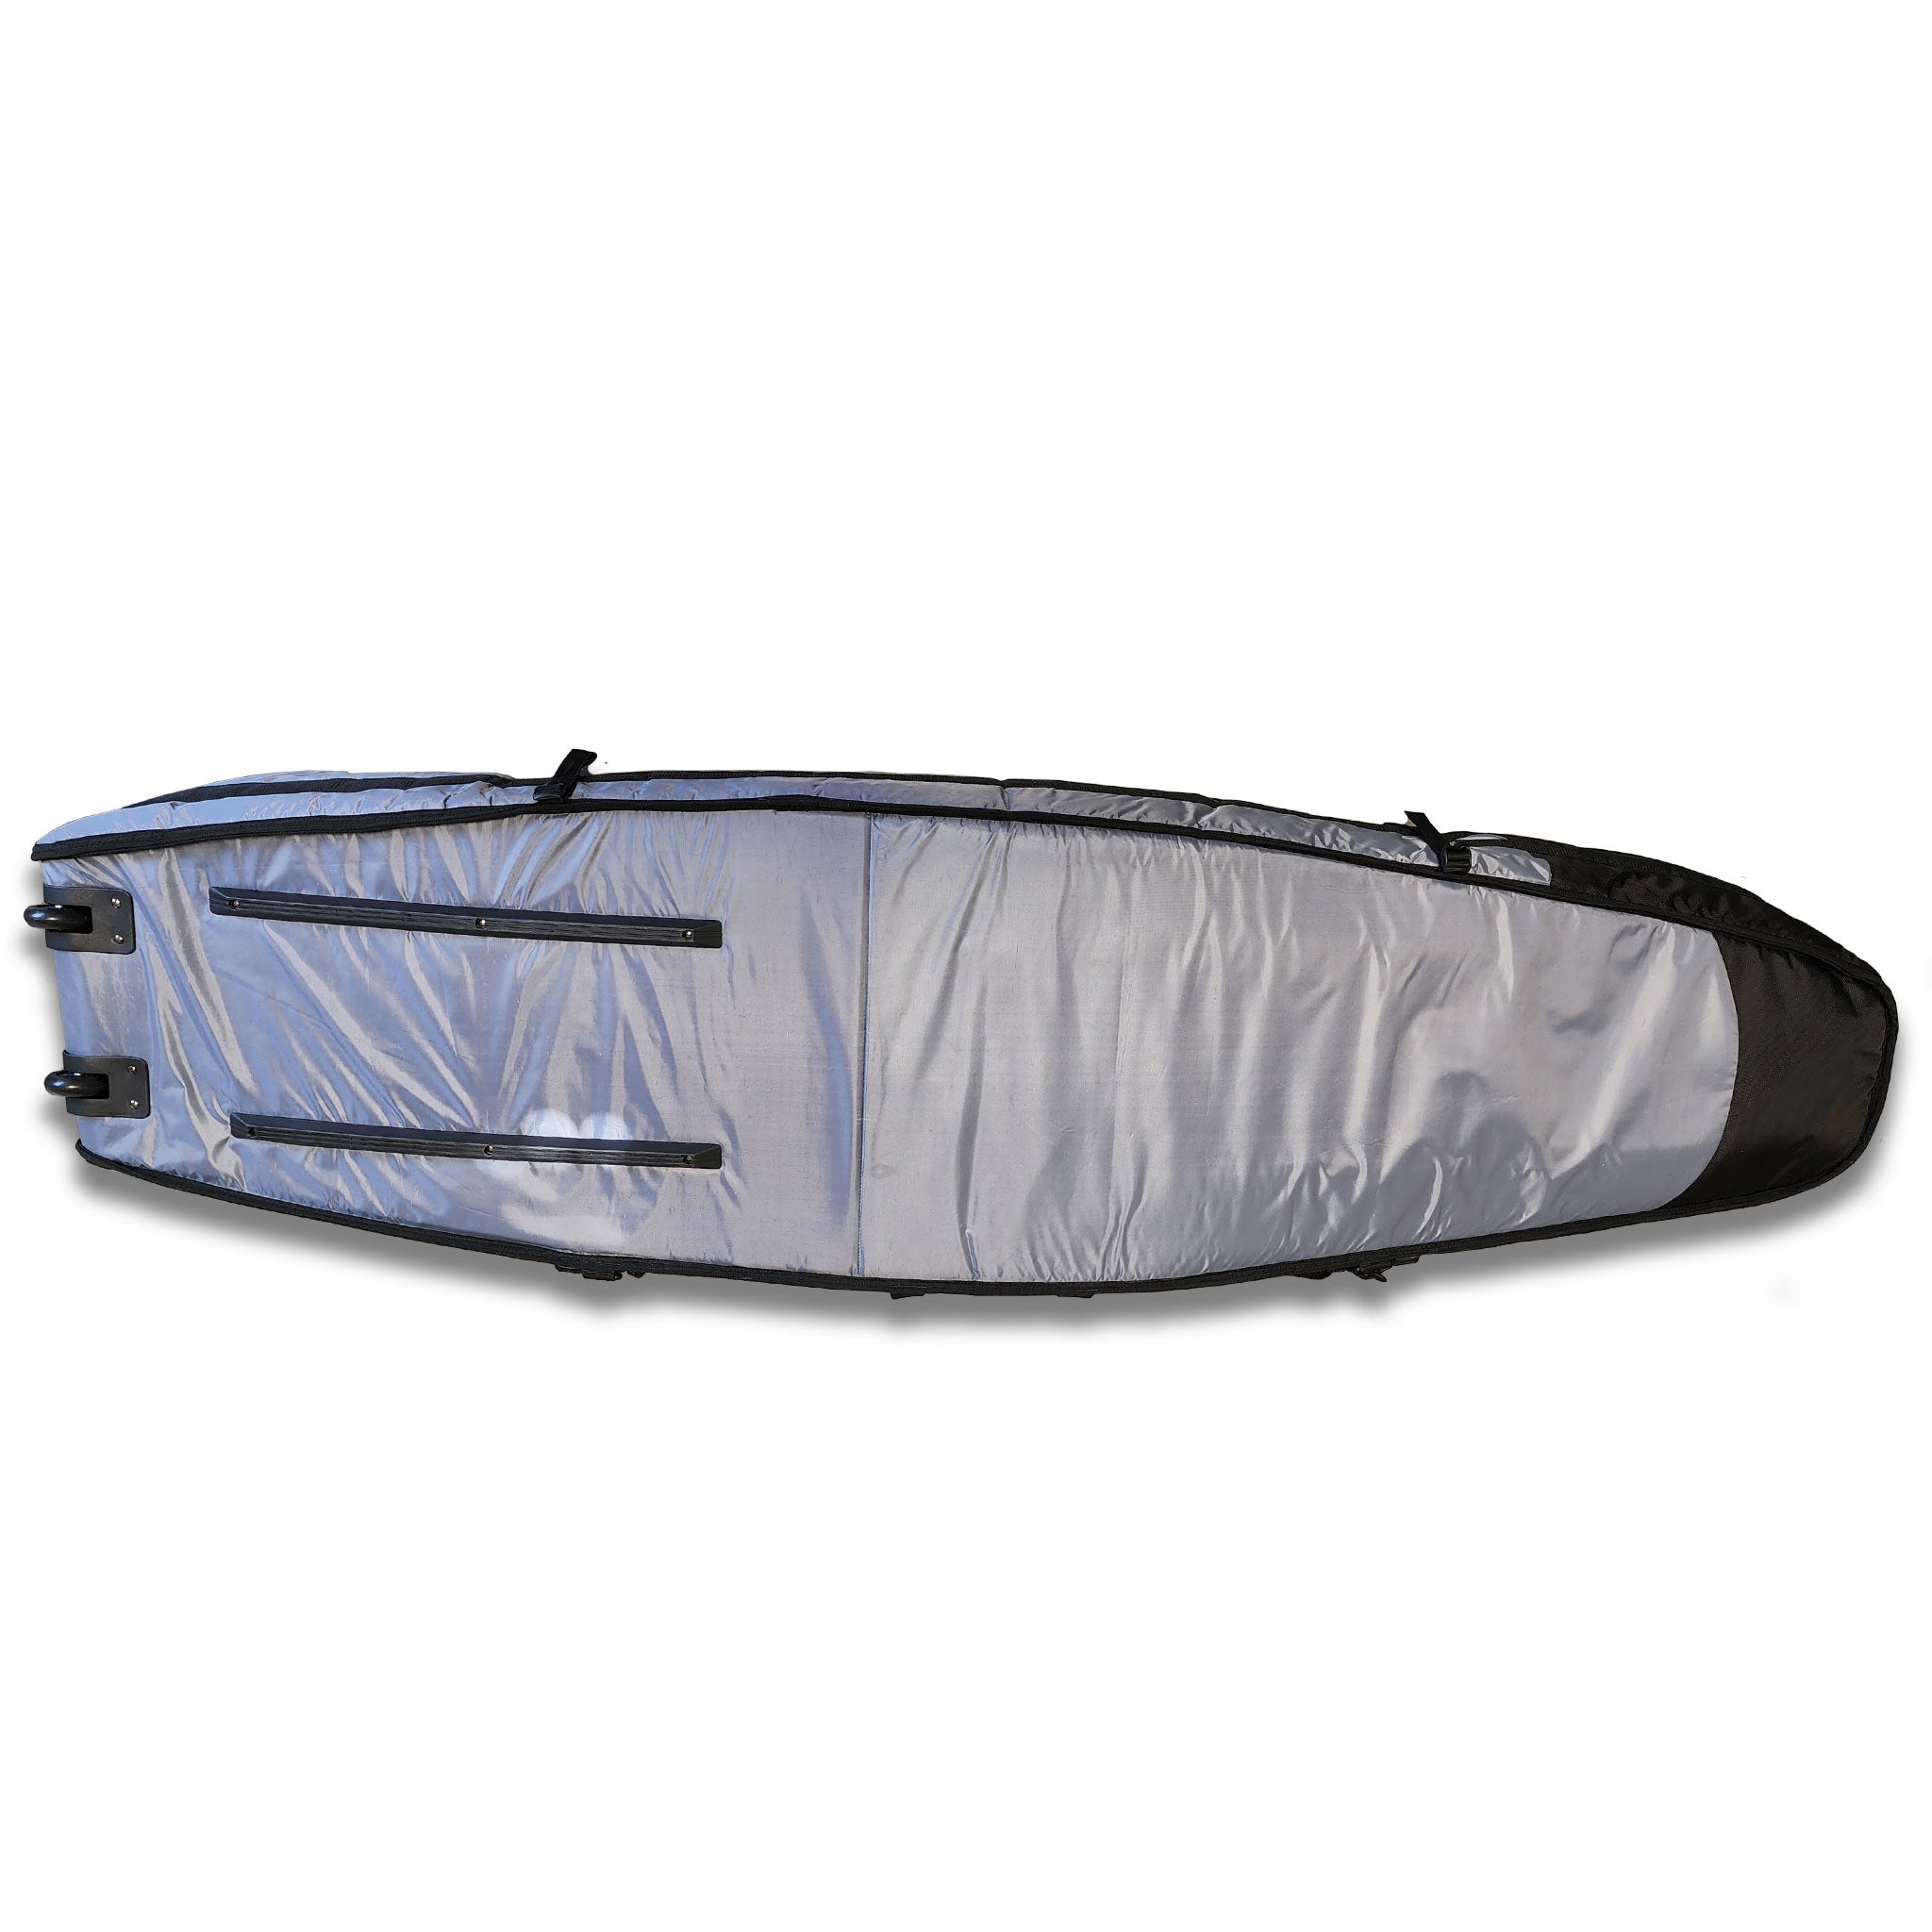 Surfboard Bags – Stay Covered